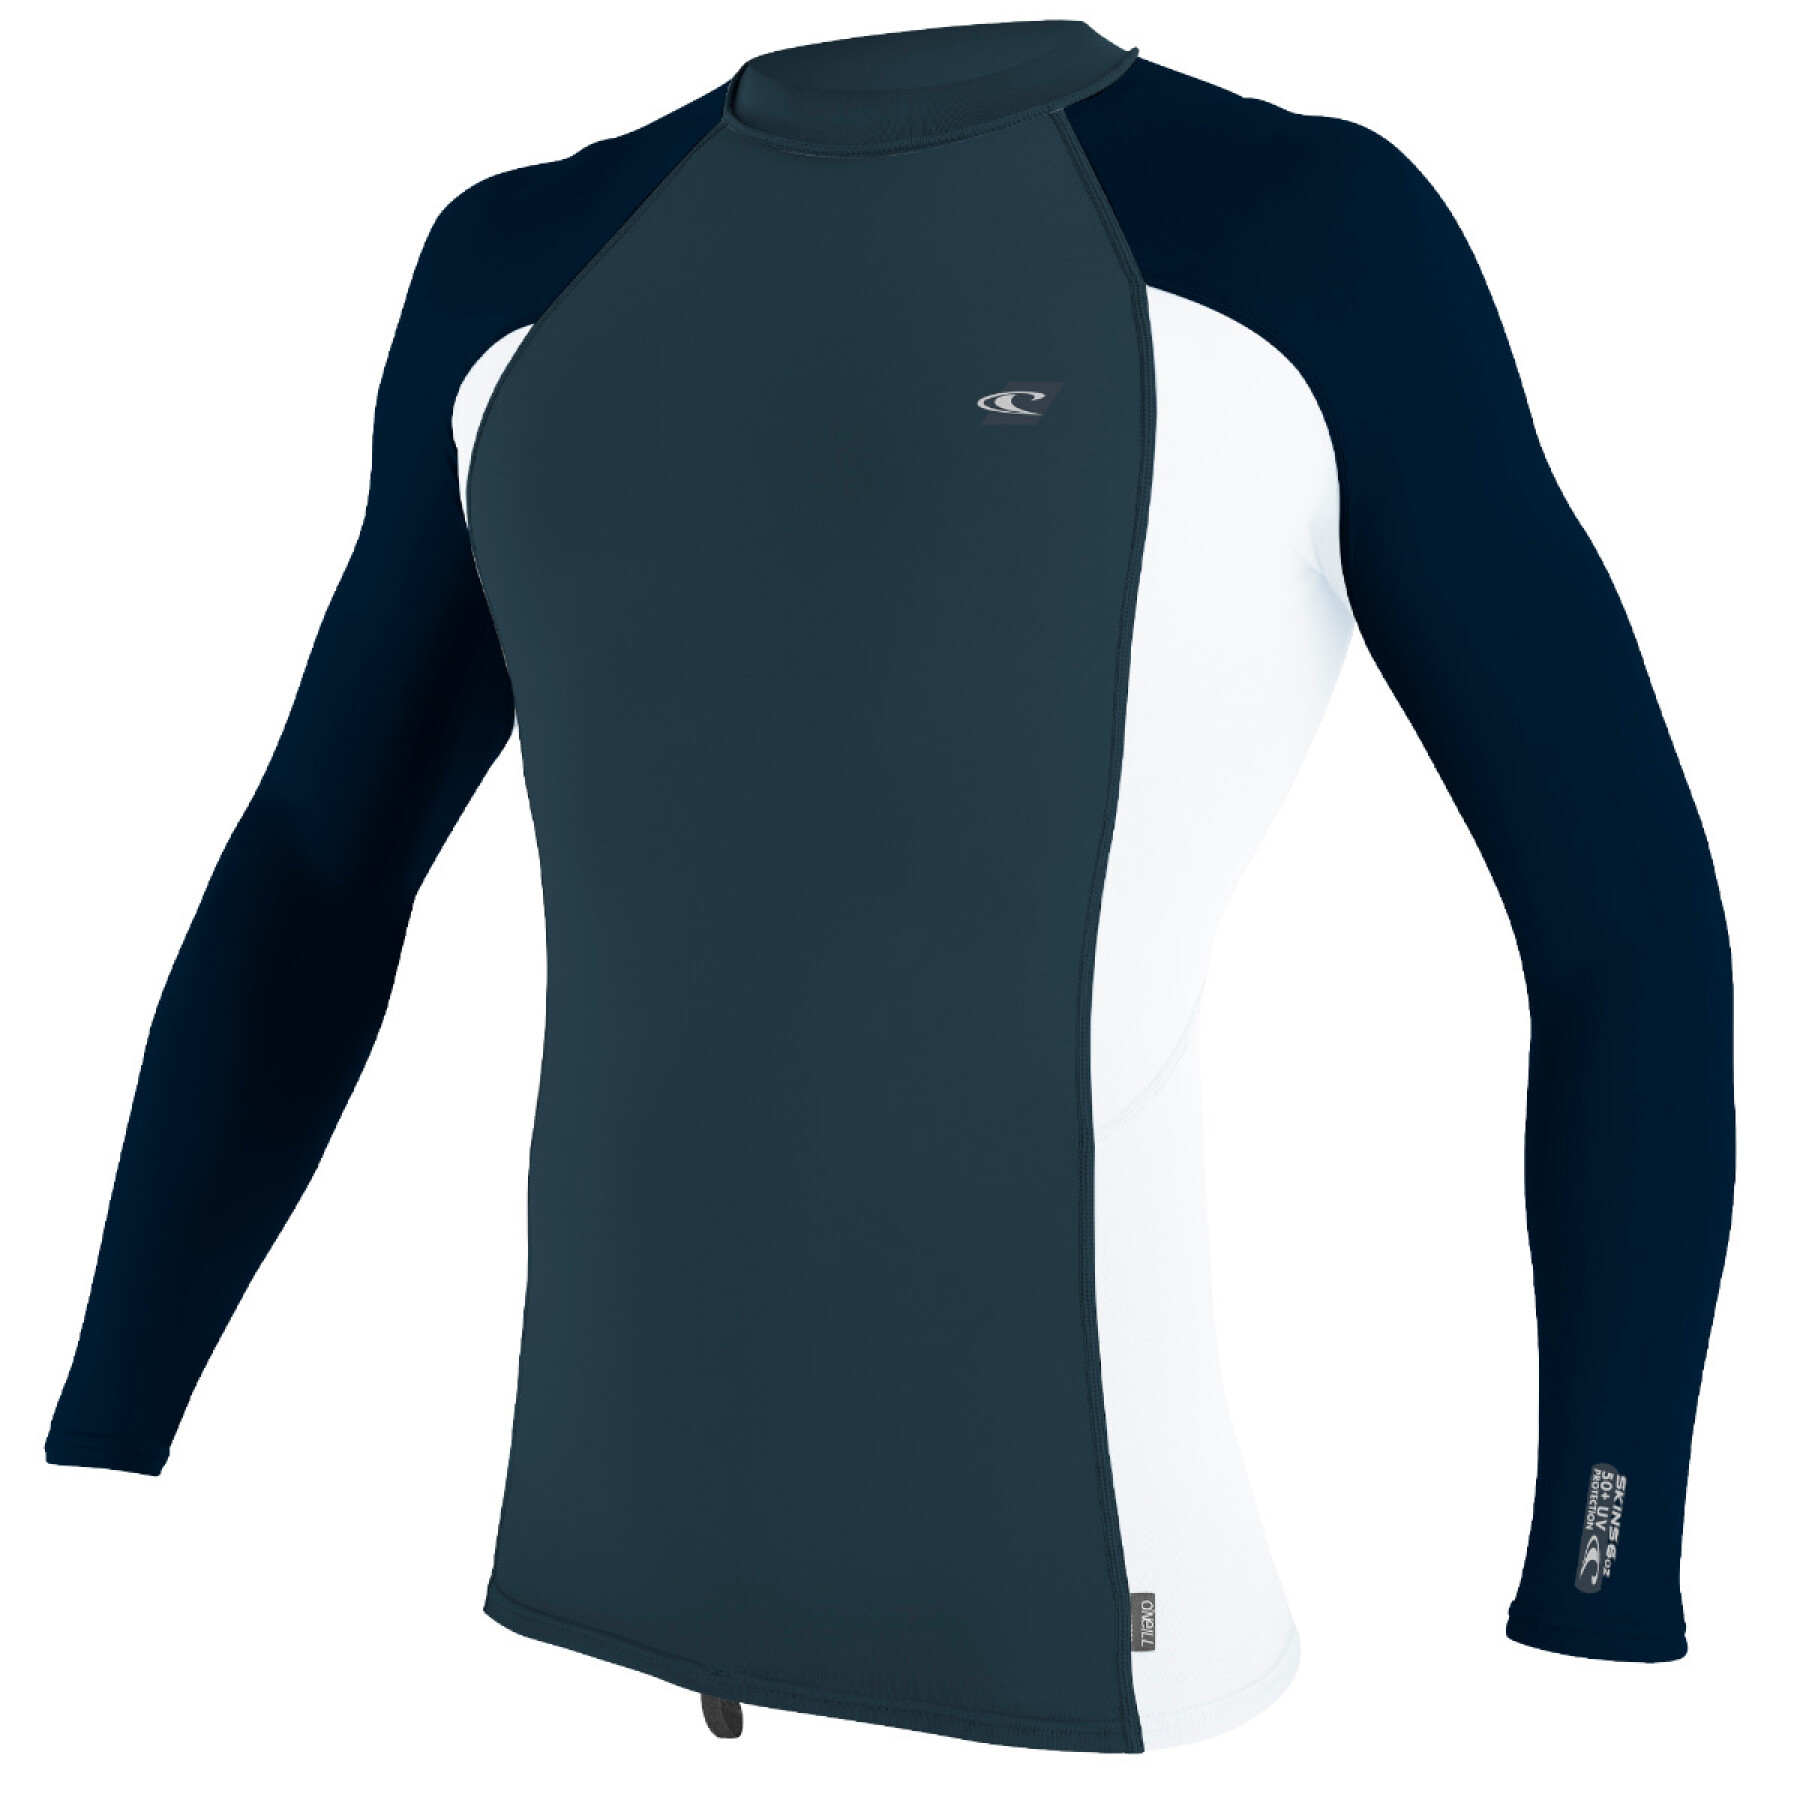 Maillot de protection manches longues O'Neill Premium Skins